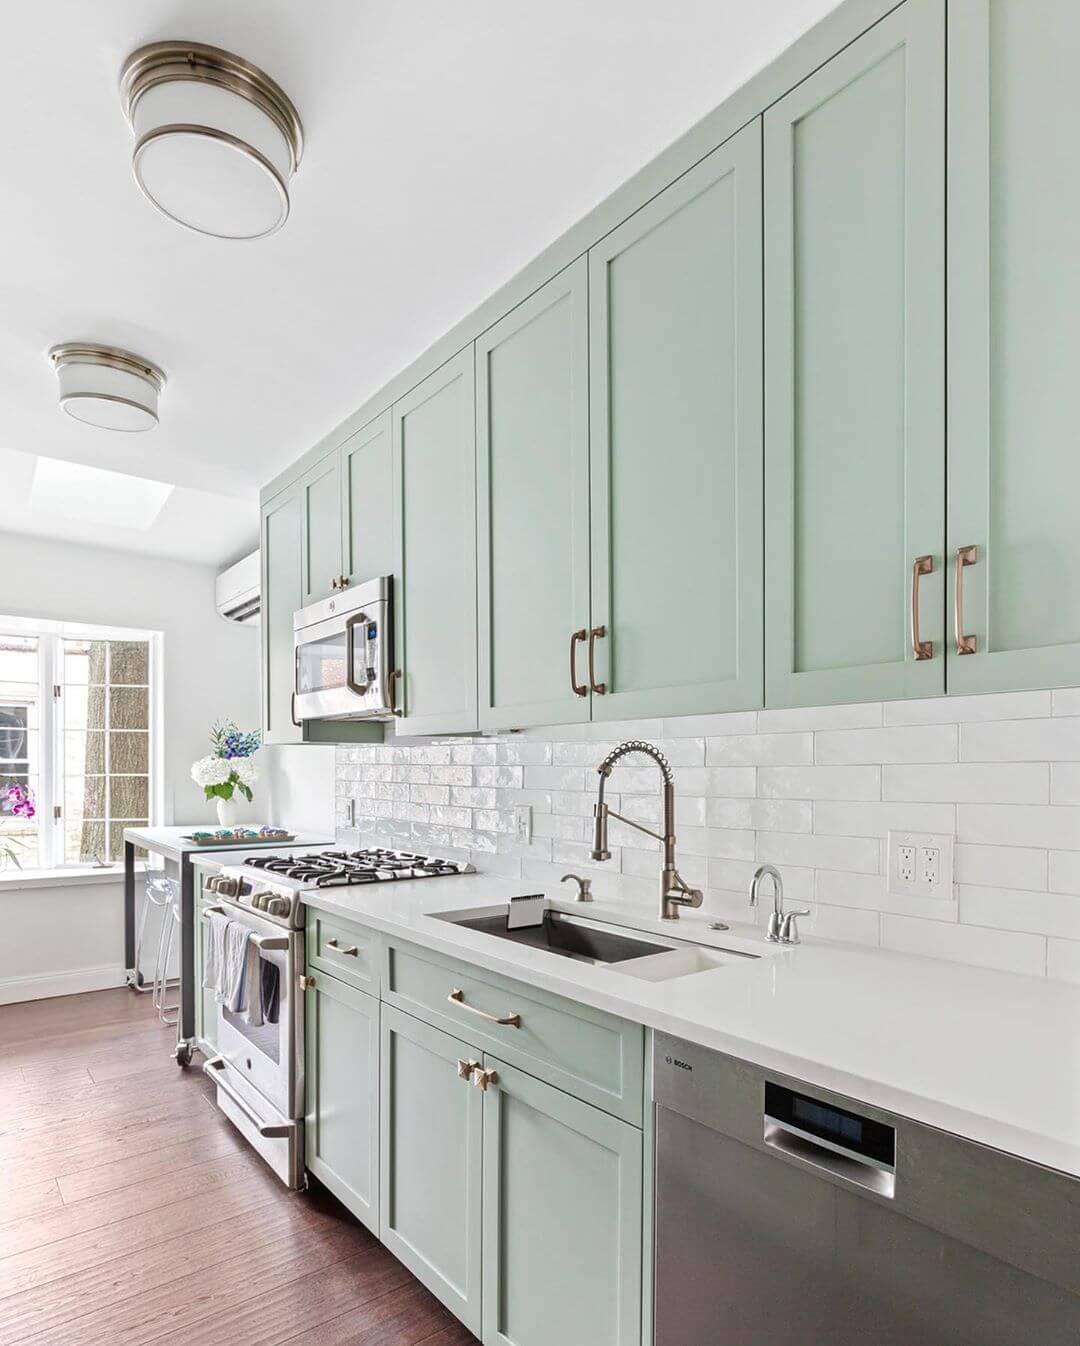 mint green cabinets are trending in 2022 kitchen designs